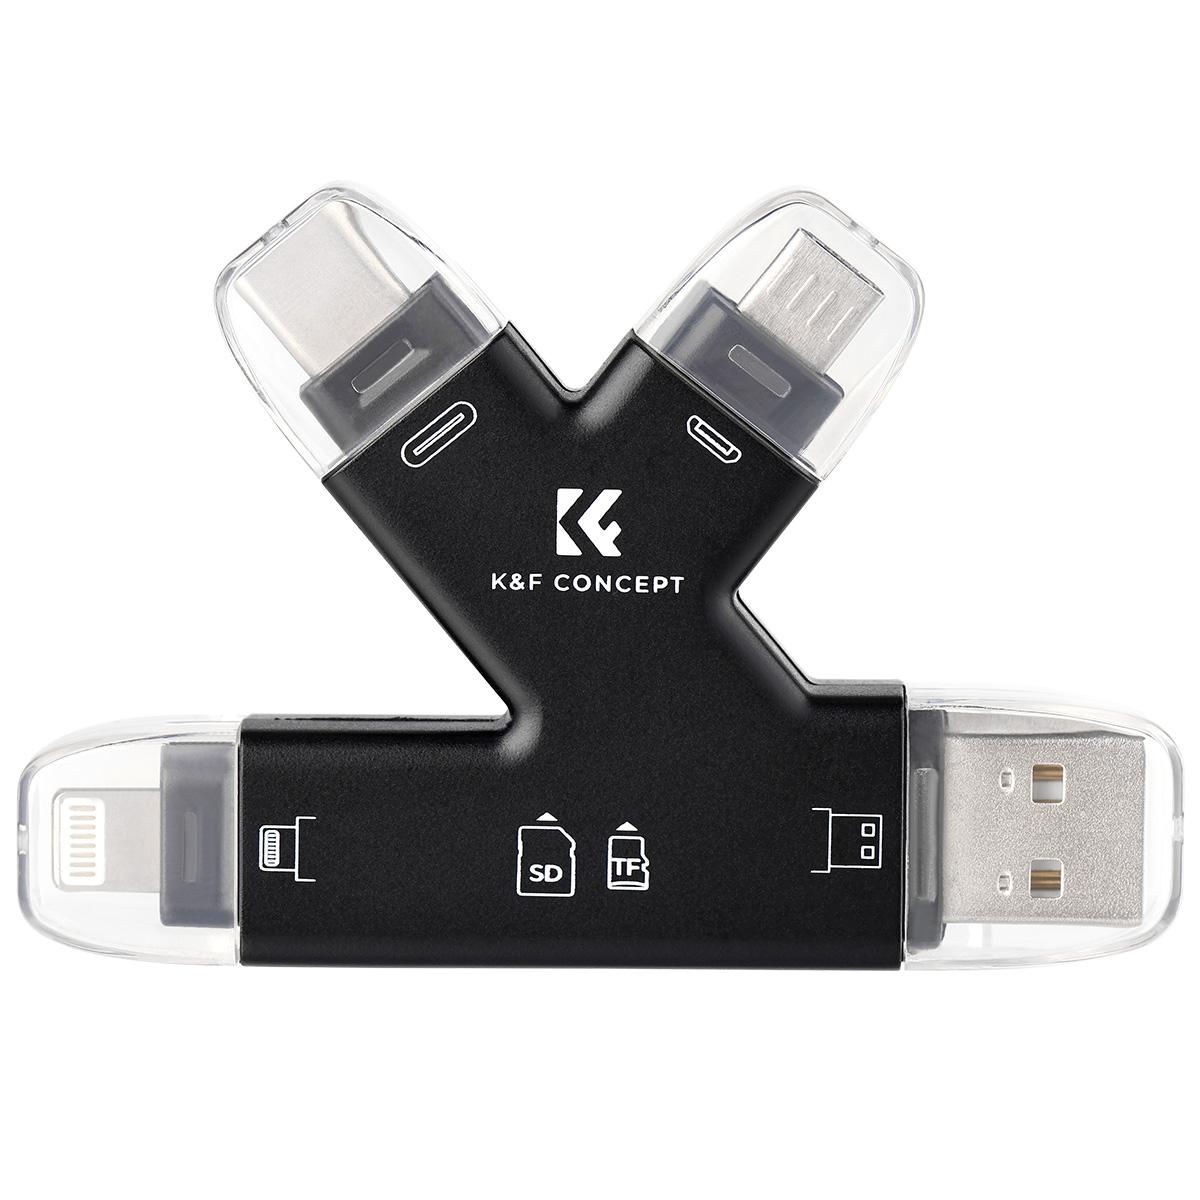 SD Card Reader for iPhone/iPad/Android/Mac/Computer/Camera - K&F Concept